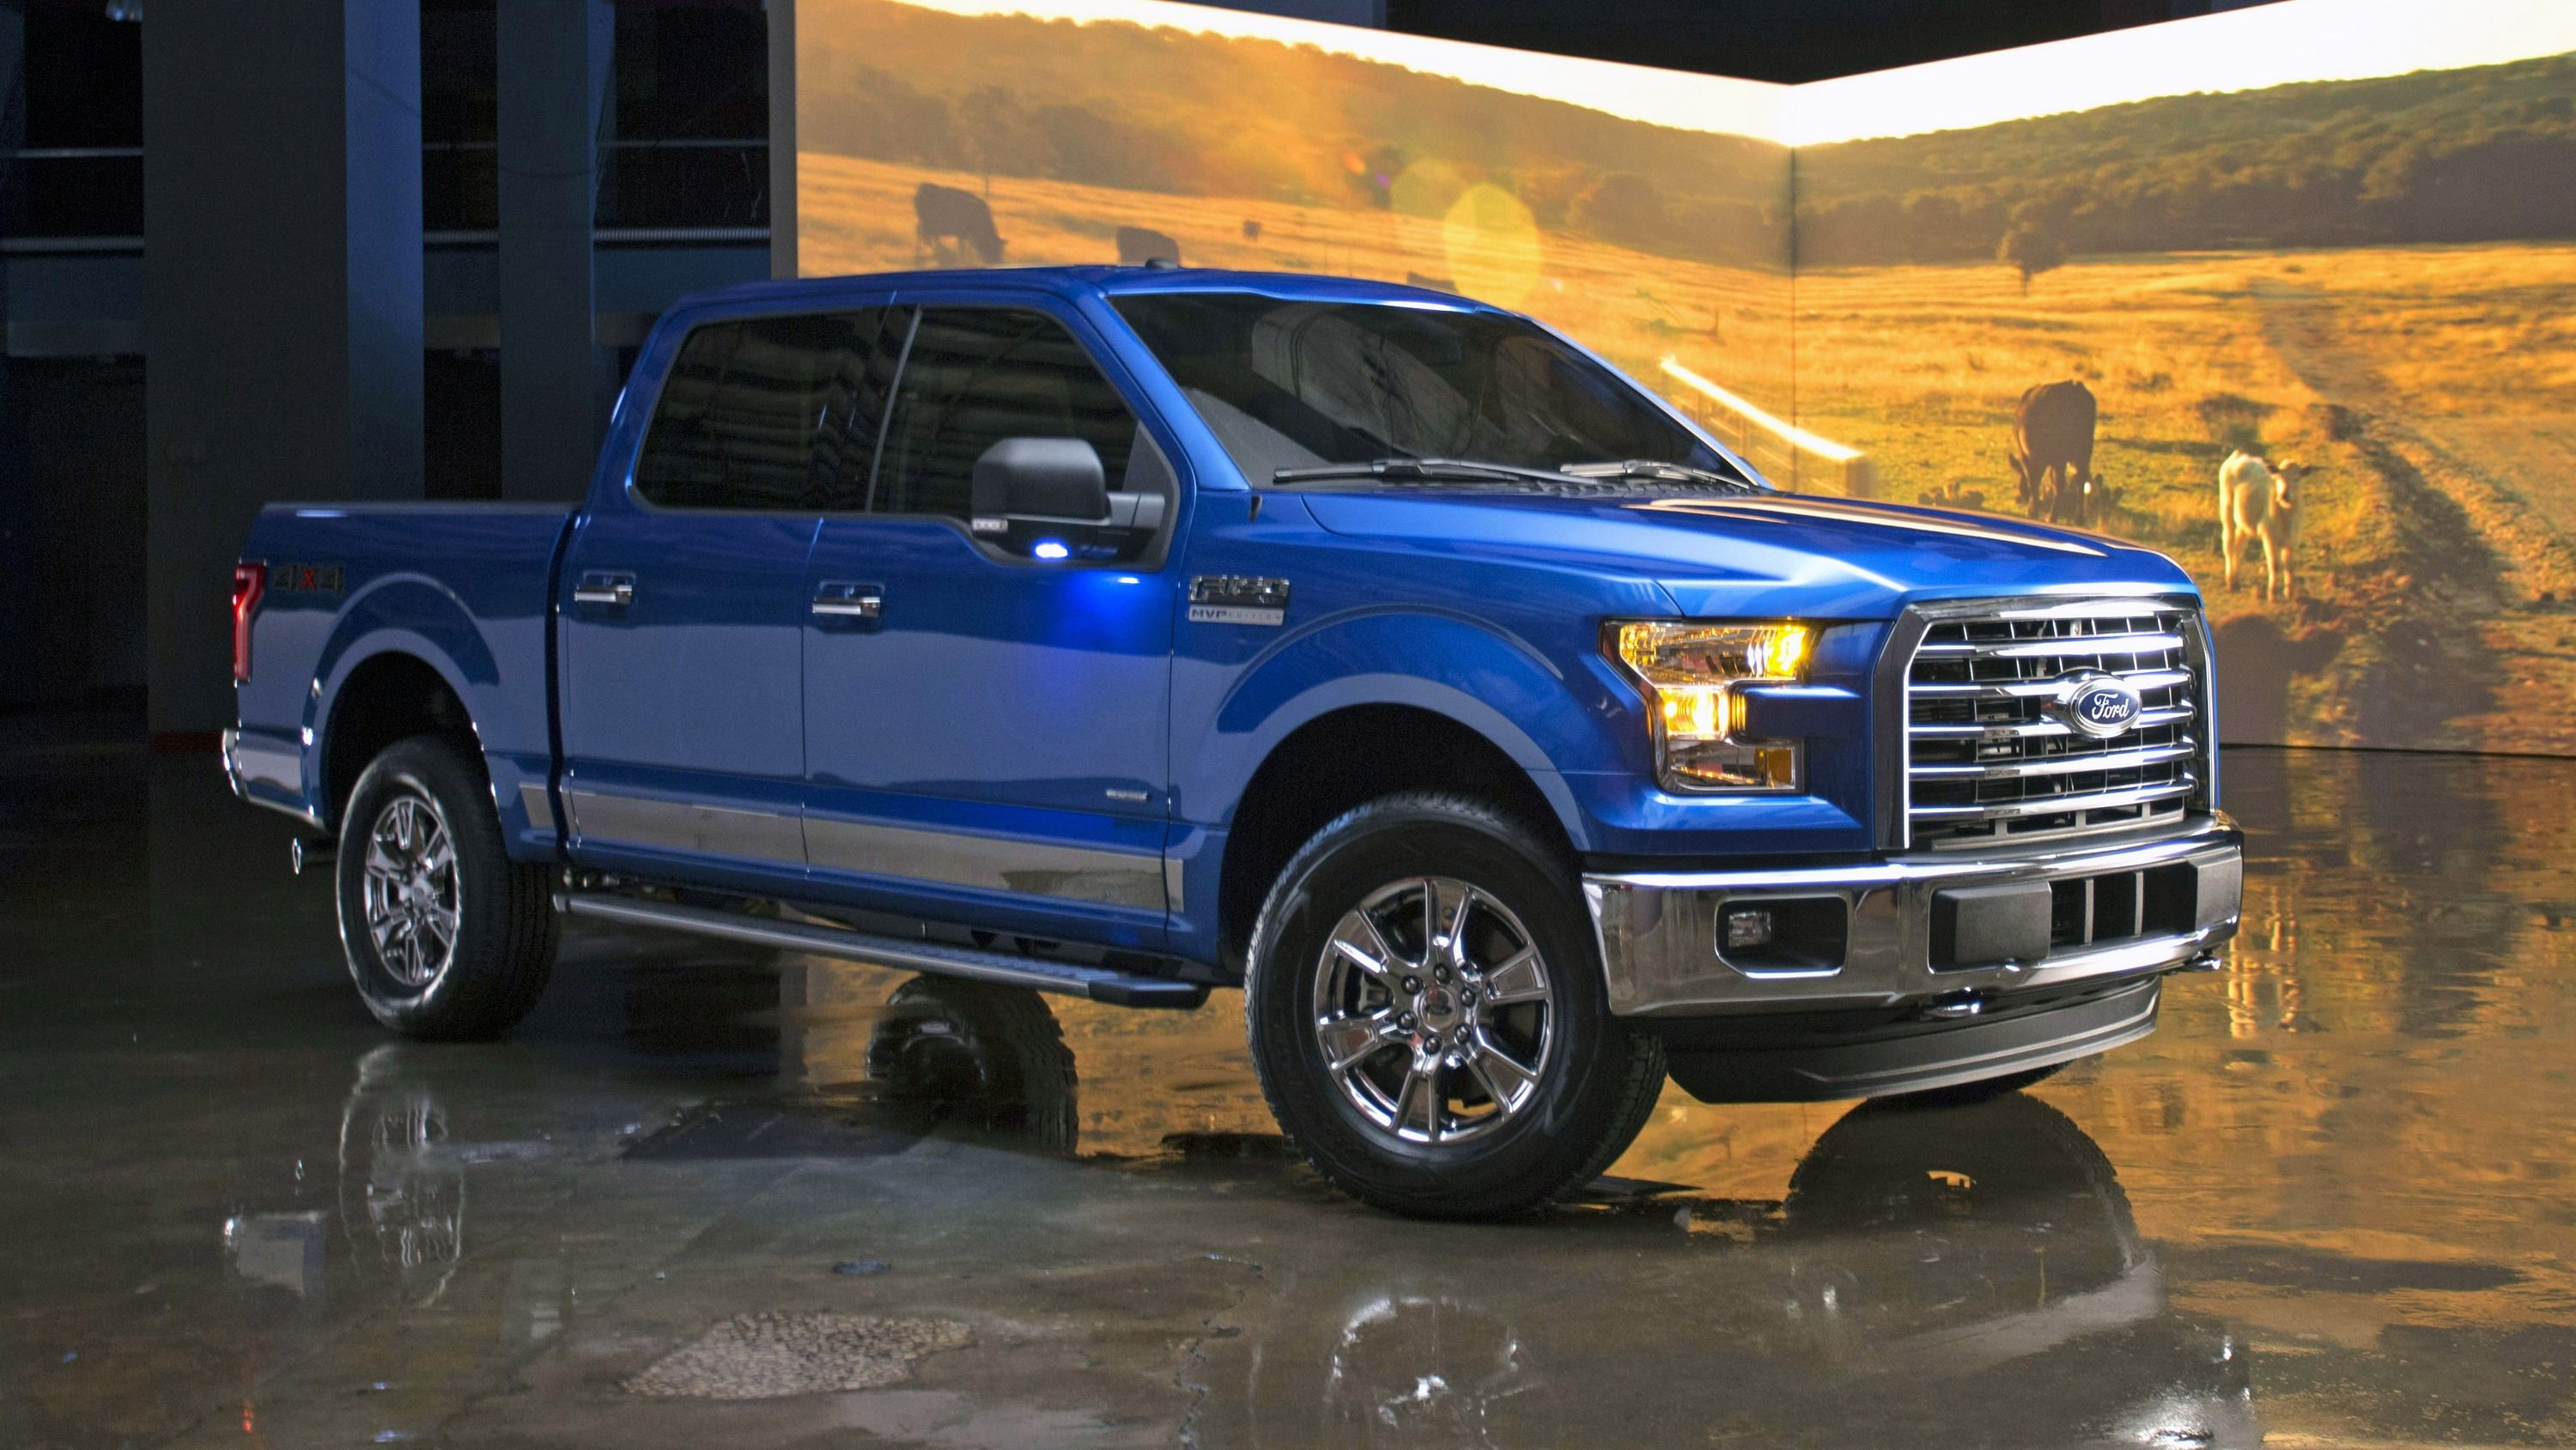 2016 Ford F-150 MVP Edition